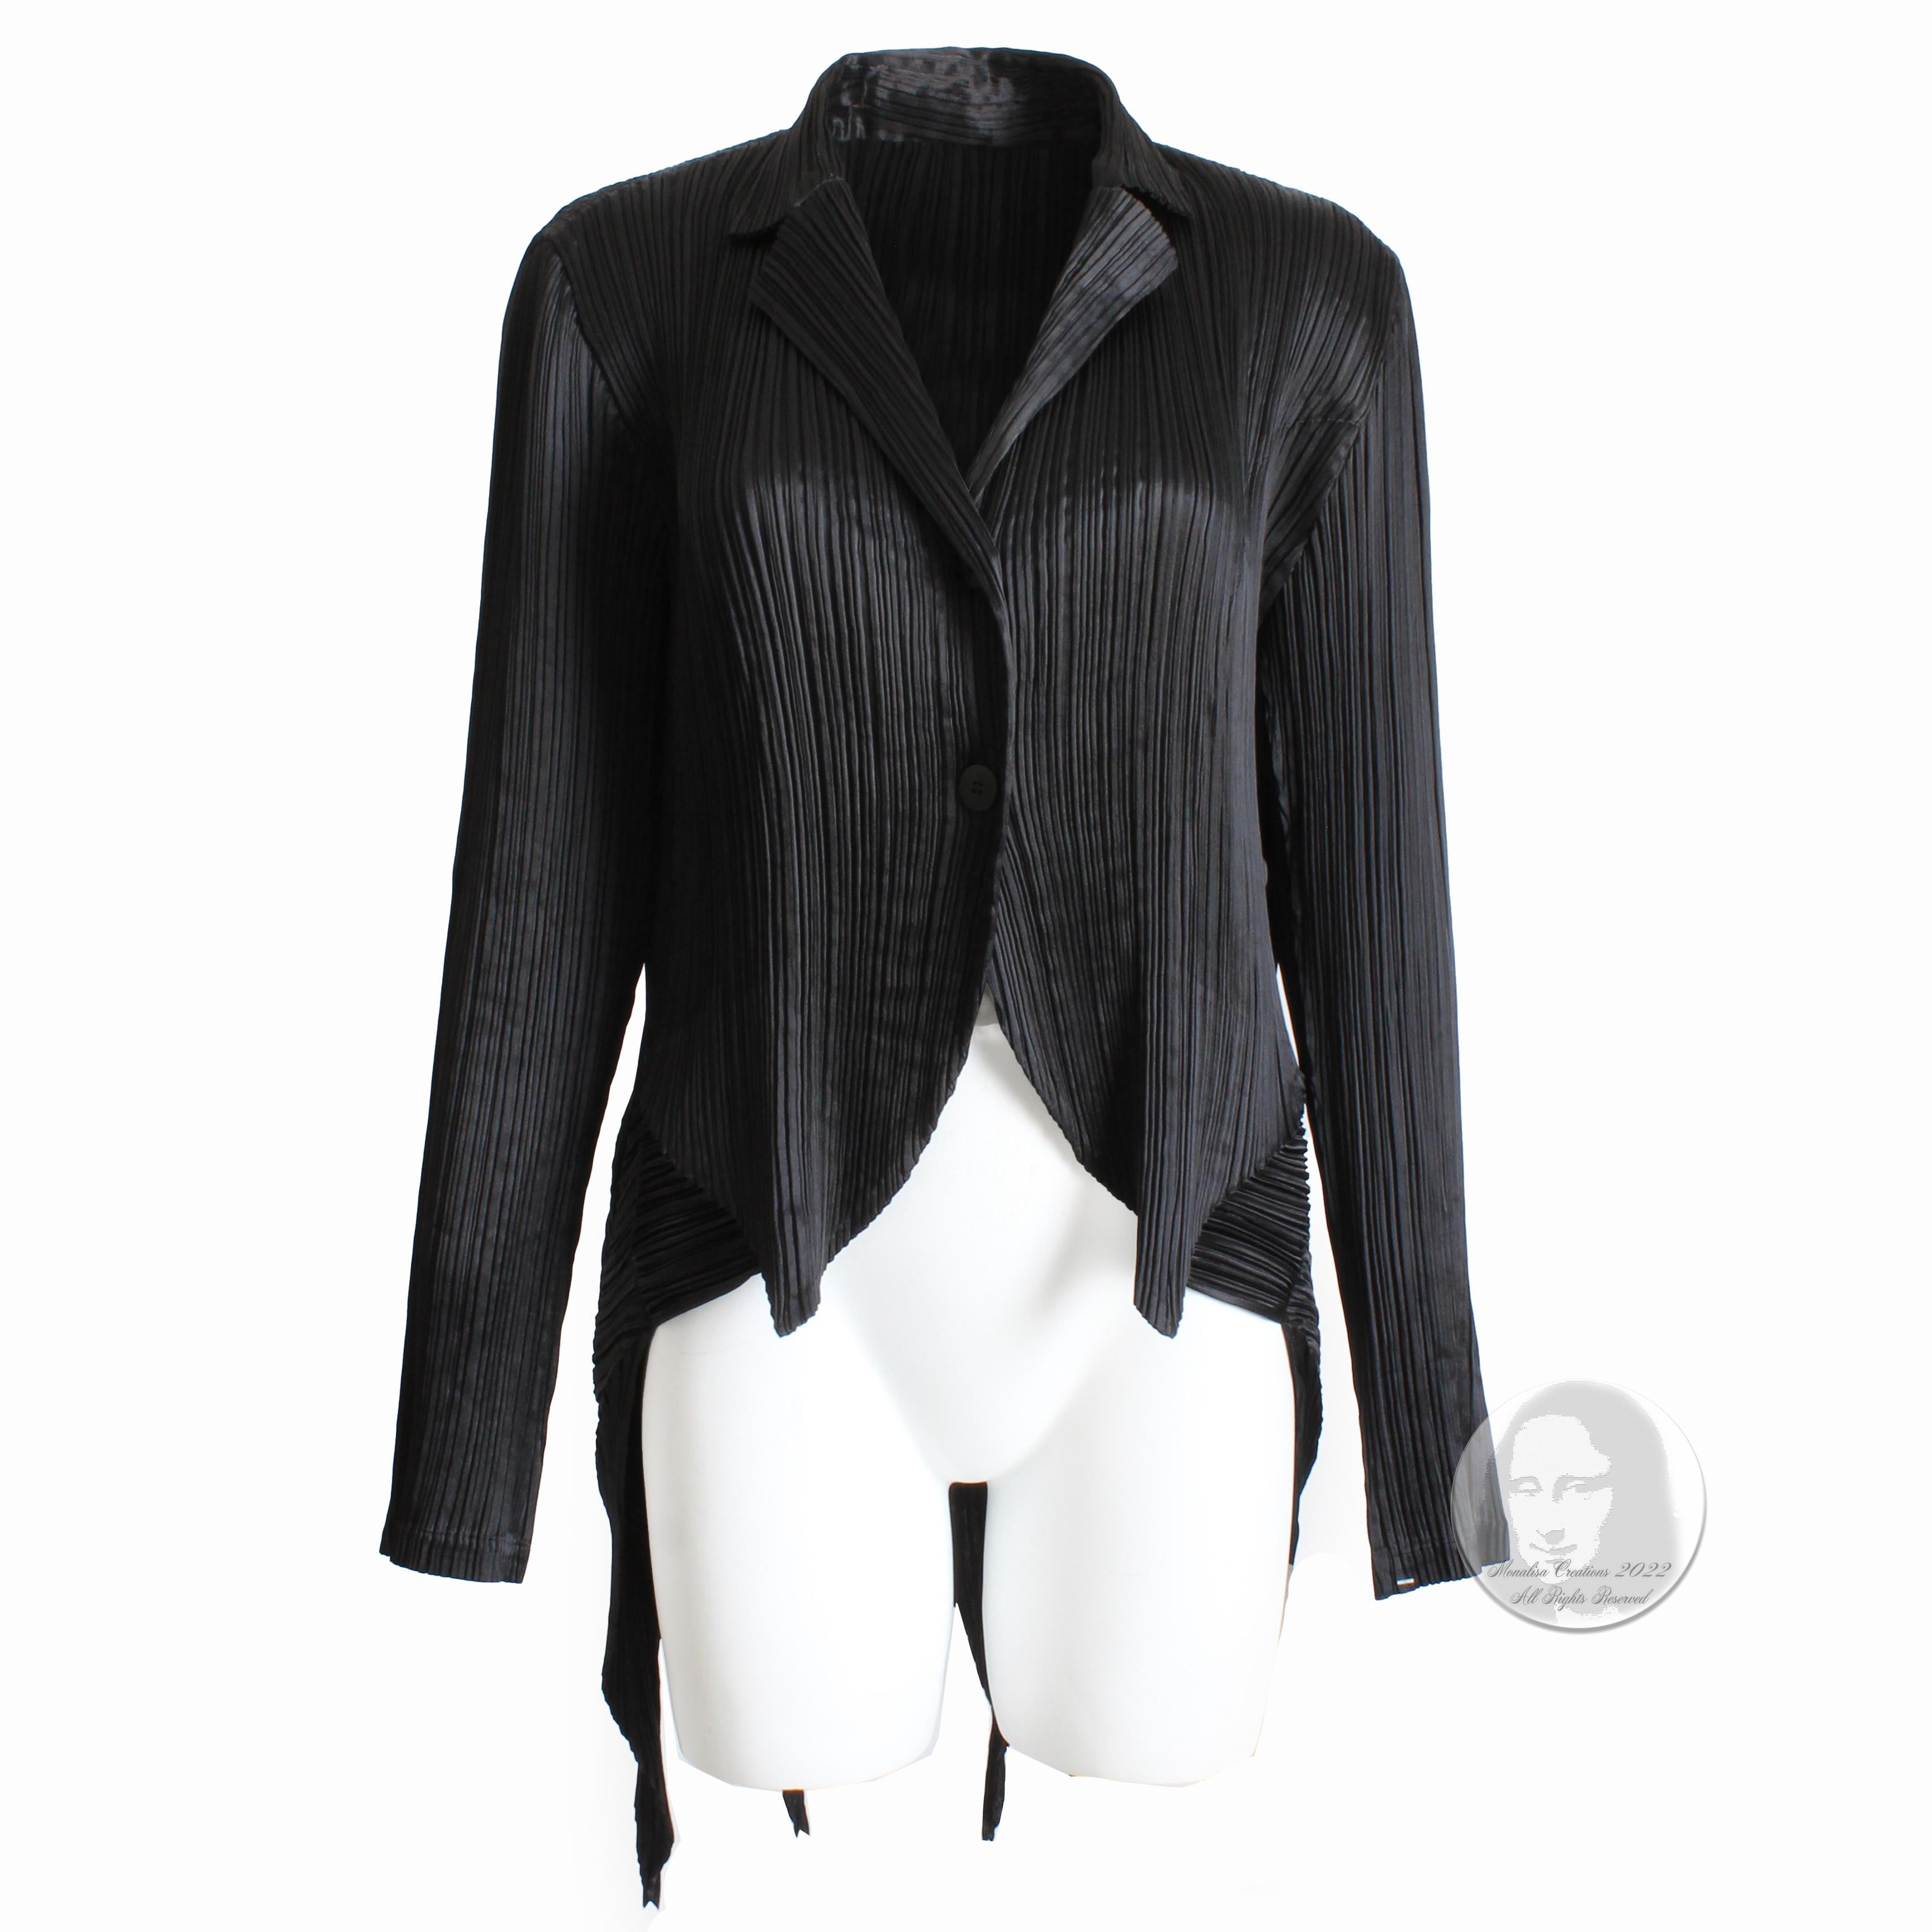 Black architecturally pleated jacket with pointed hem tails, made by the late, great Issey Miyake, most likely in the late 90s.  Made from black pleated polyester, the panels are architecturally constructed with pointed hem panels that cascade like